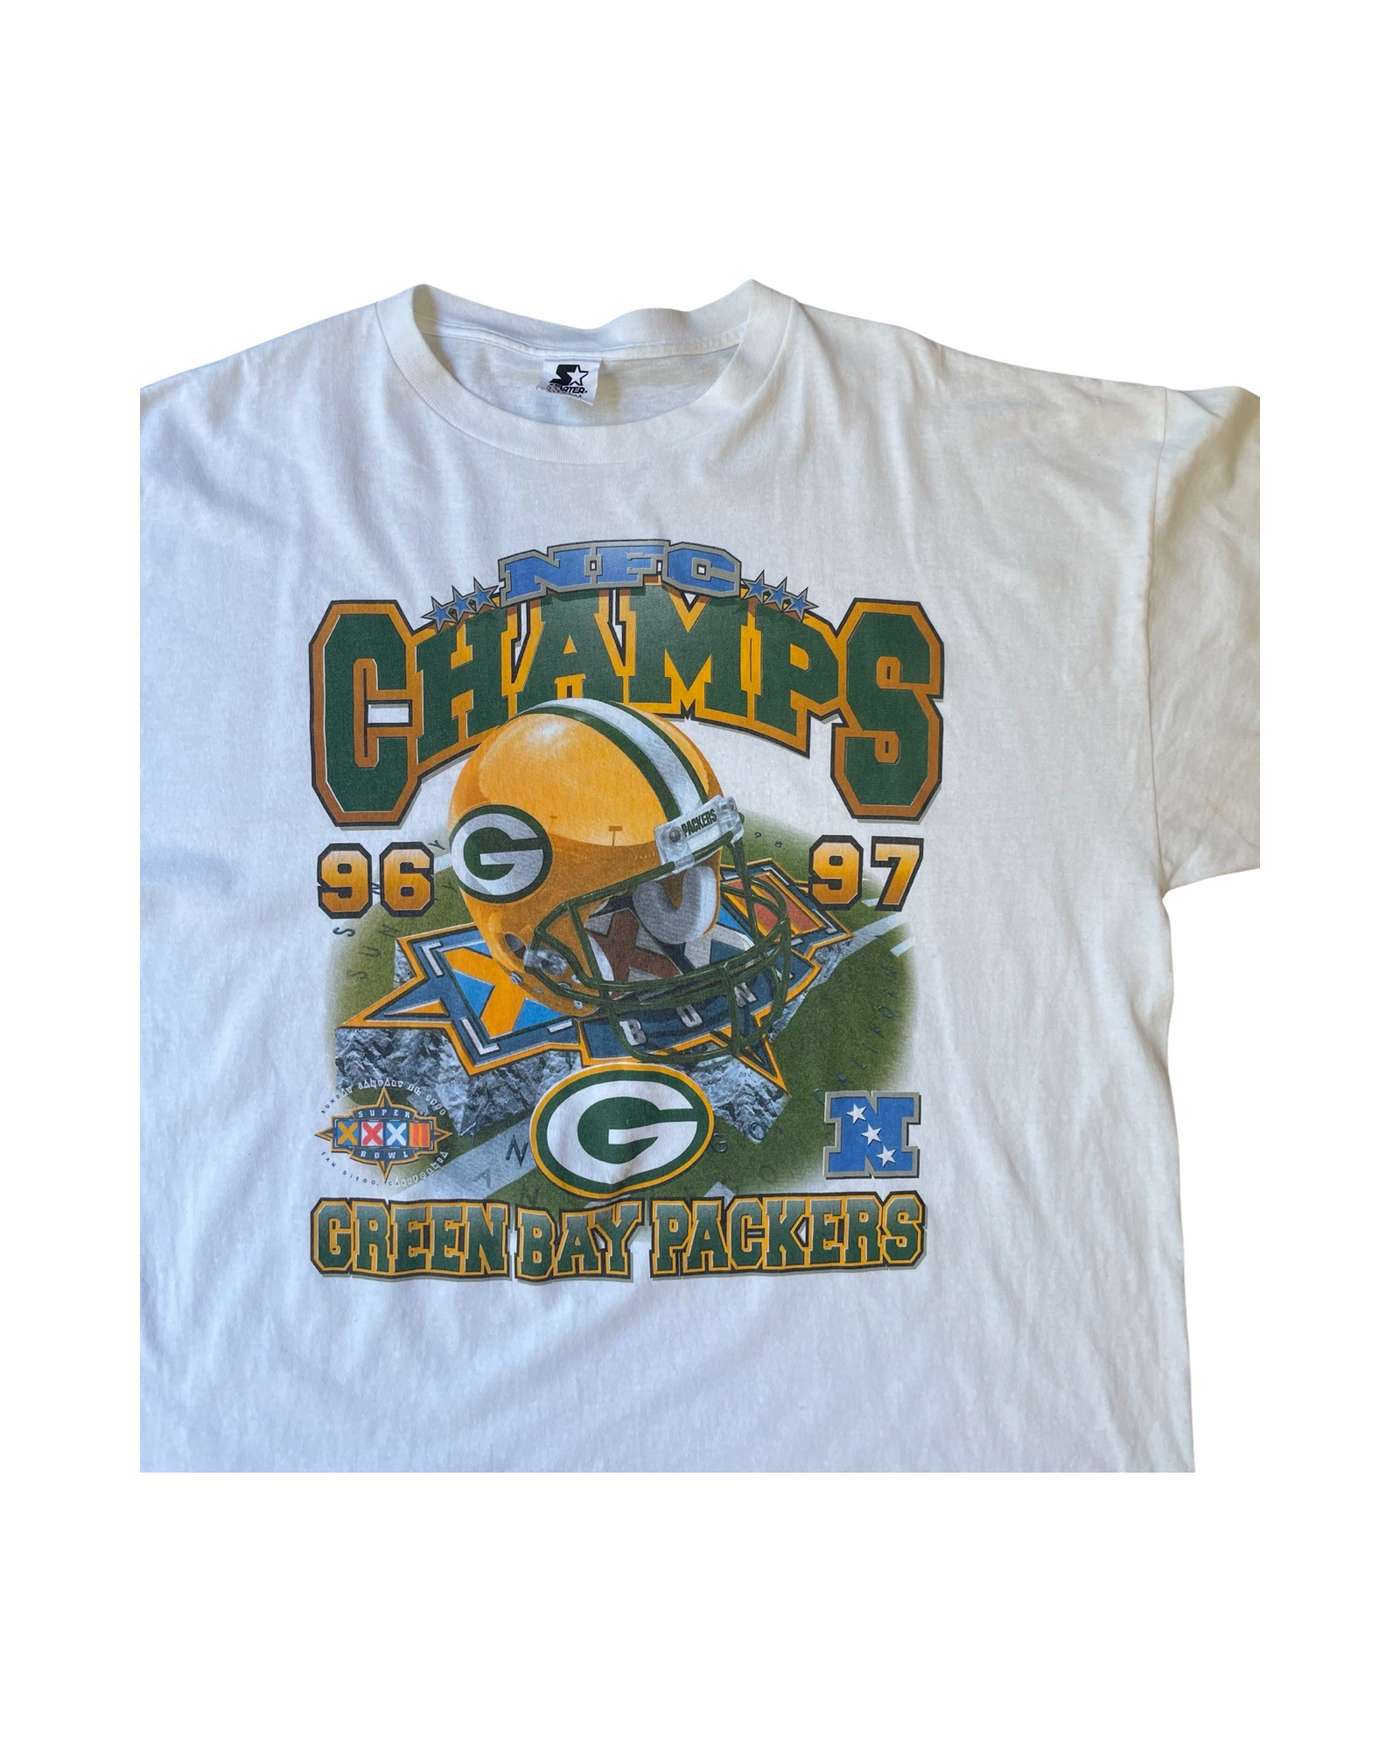 Vintage NFL Green Bay Packers 96 to 97 Super-bowl T -Shirt Size XL